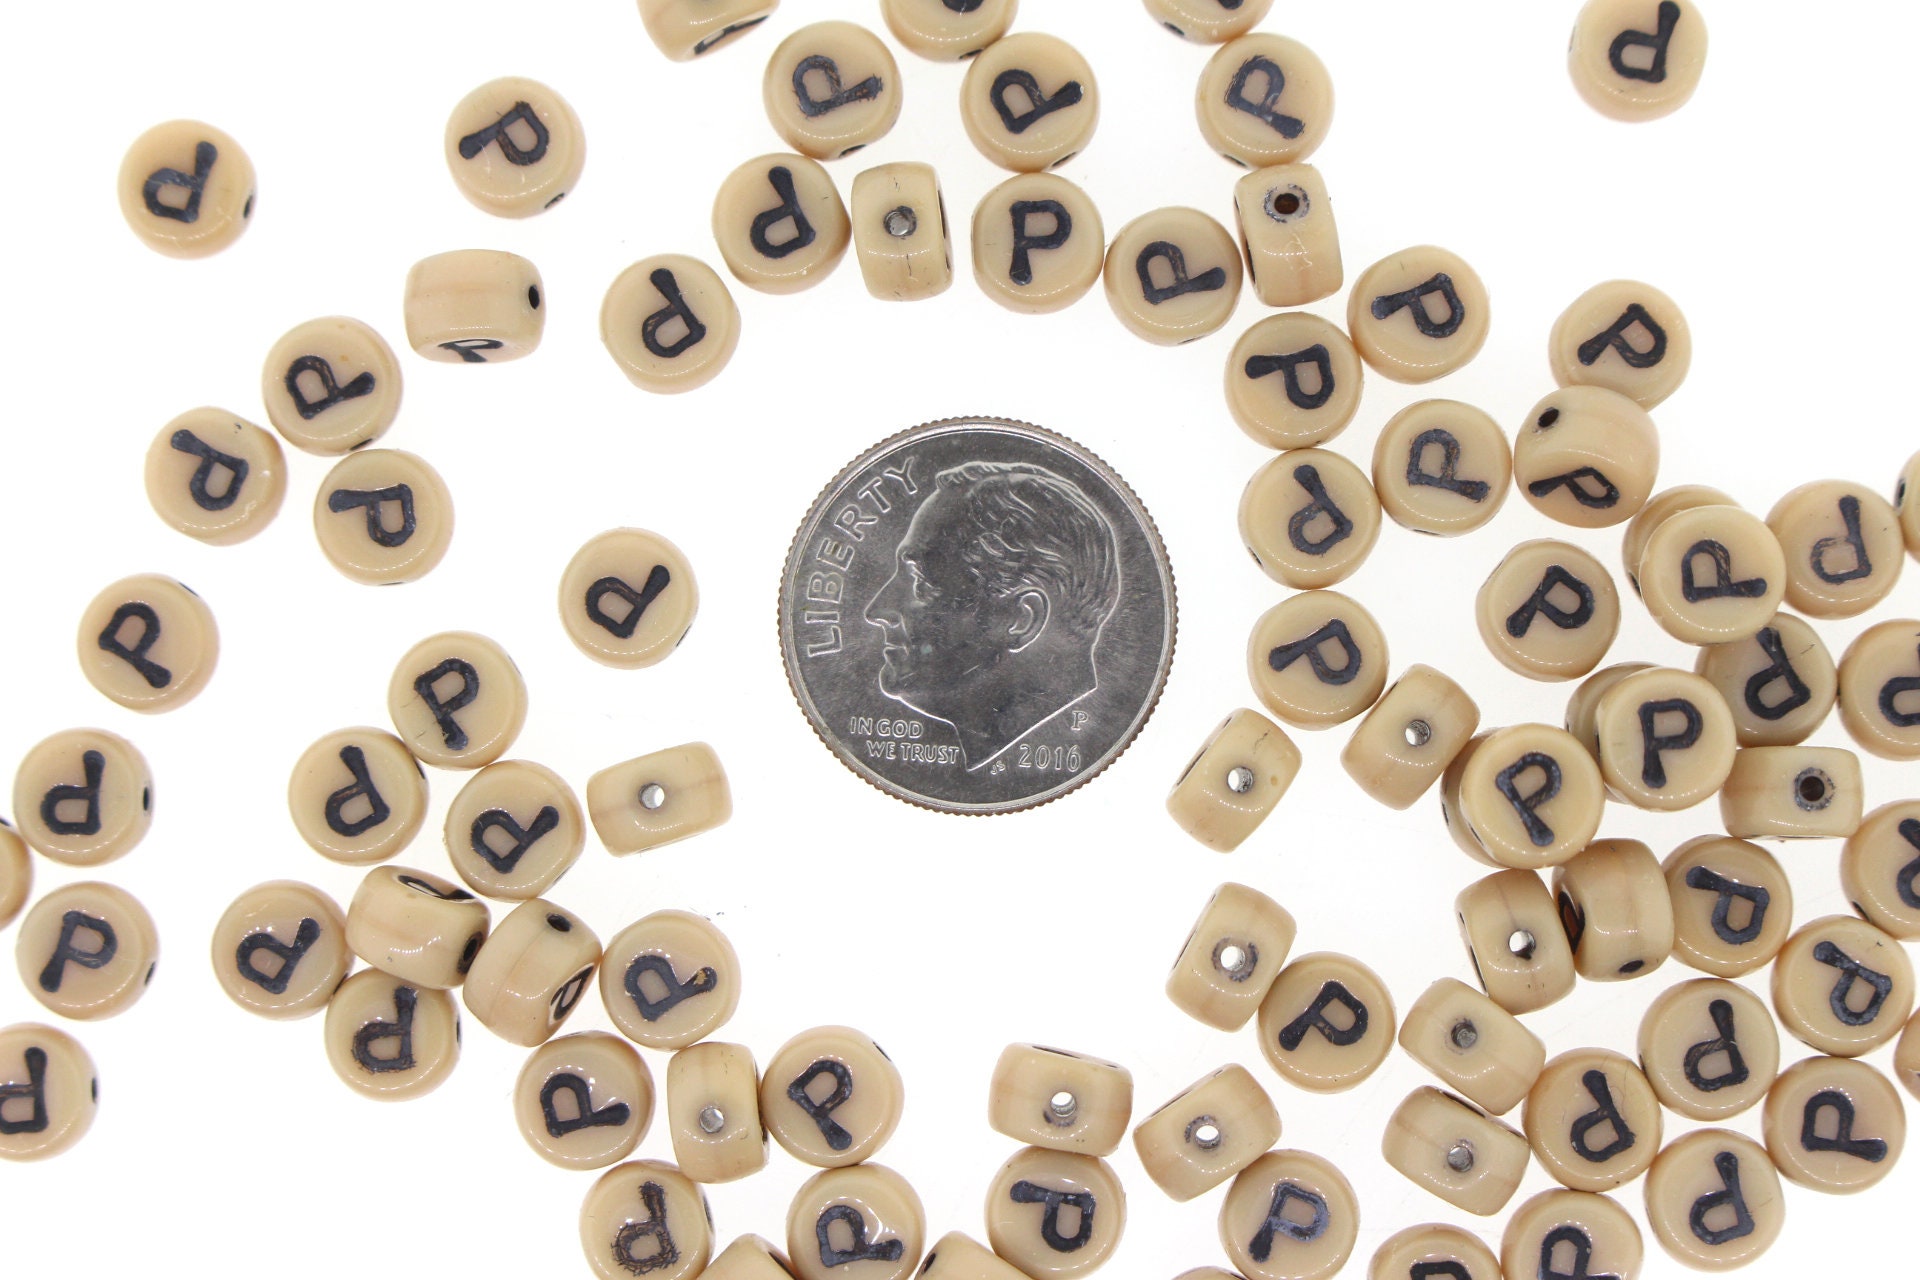 100 Piece Letter & Number Beads YOU CHOOSE Tan Beads With Black Lettering  6mm Glass Beads 